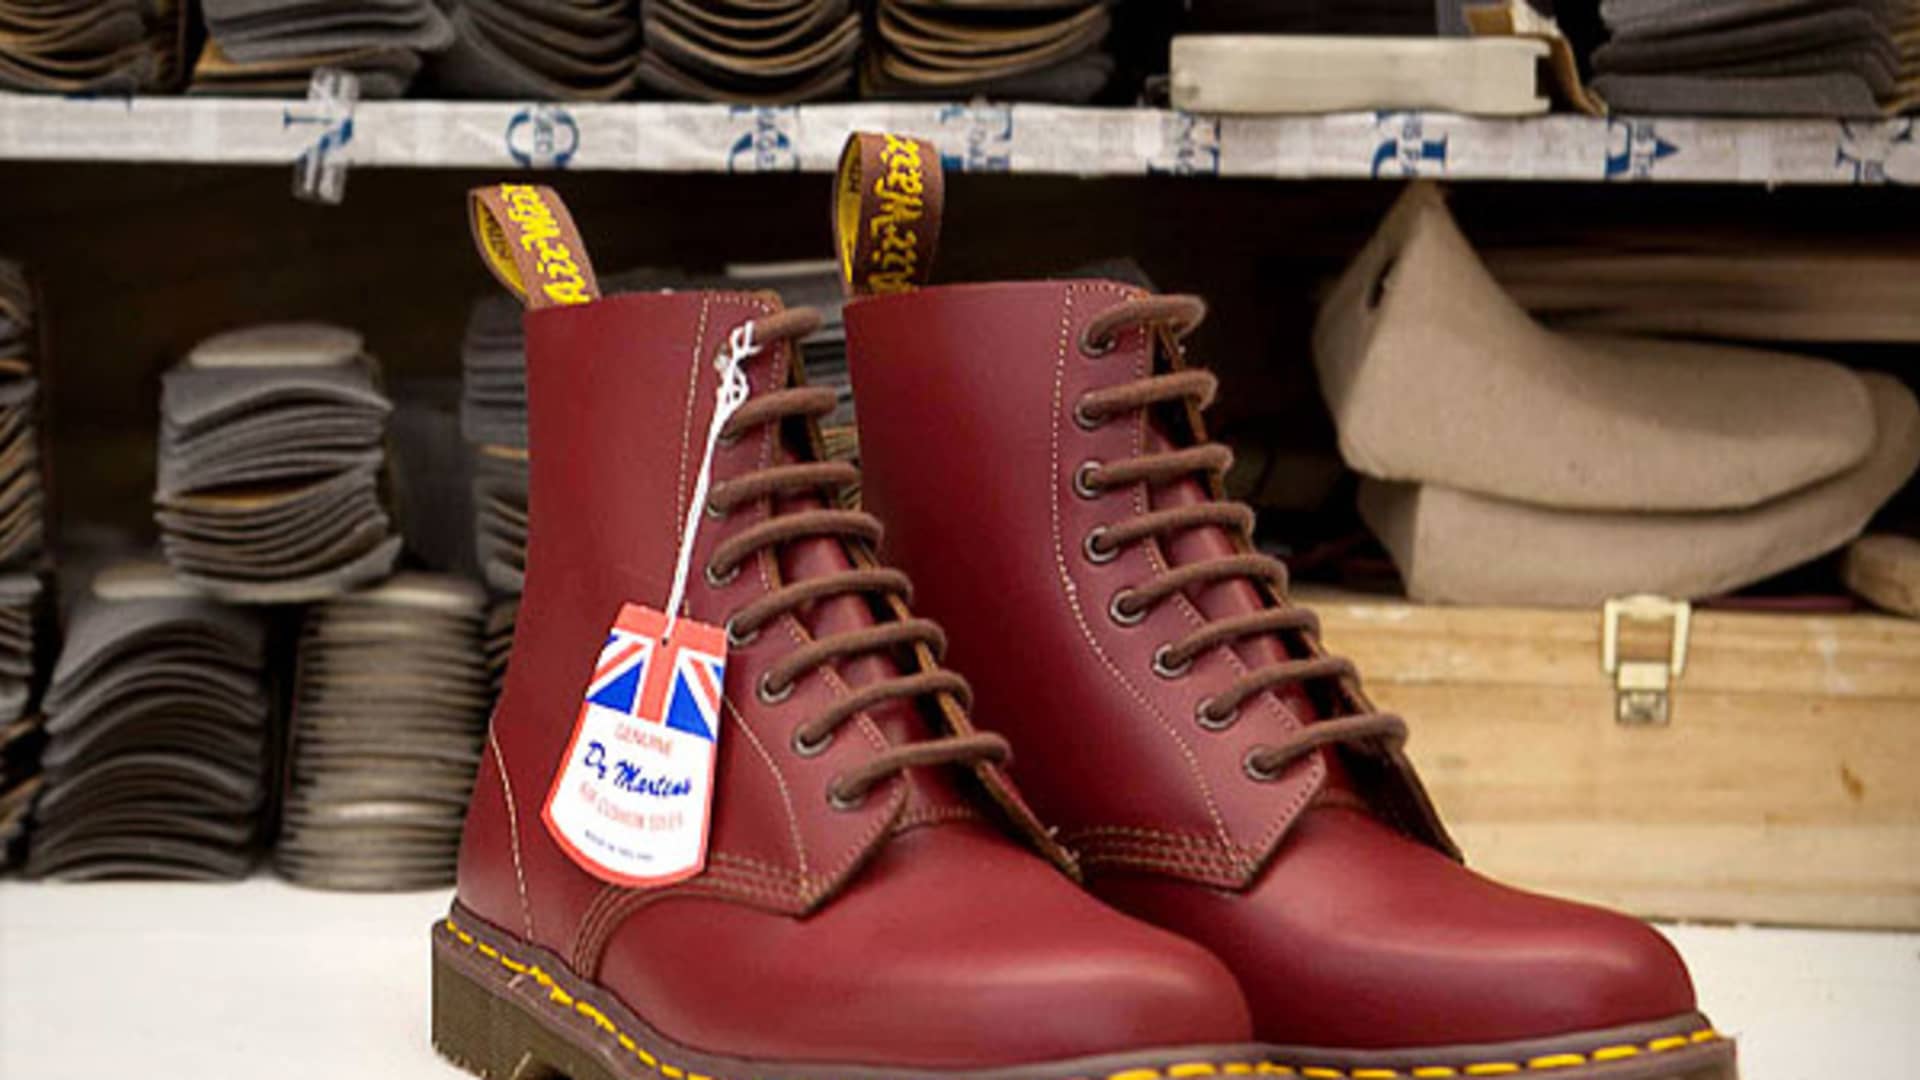 Dr. Martens shares plunge 30% to all-time minimal, trading briefly halted on weak outlook